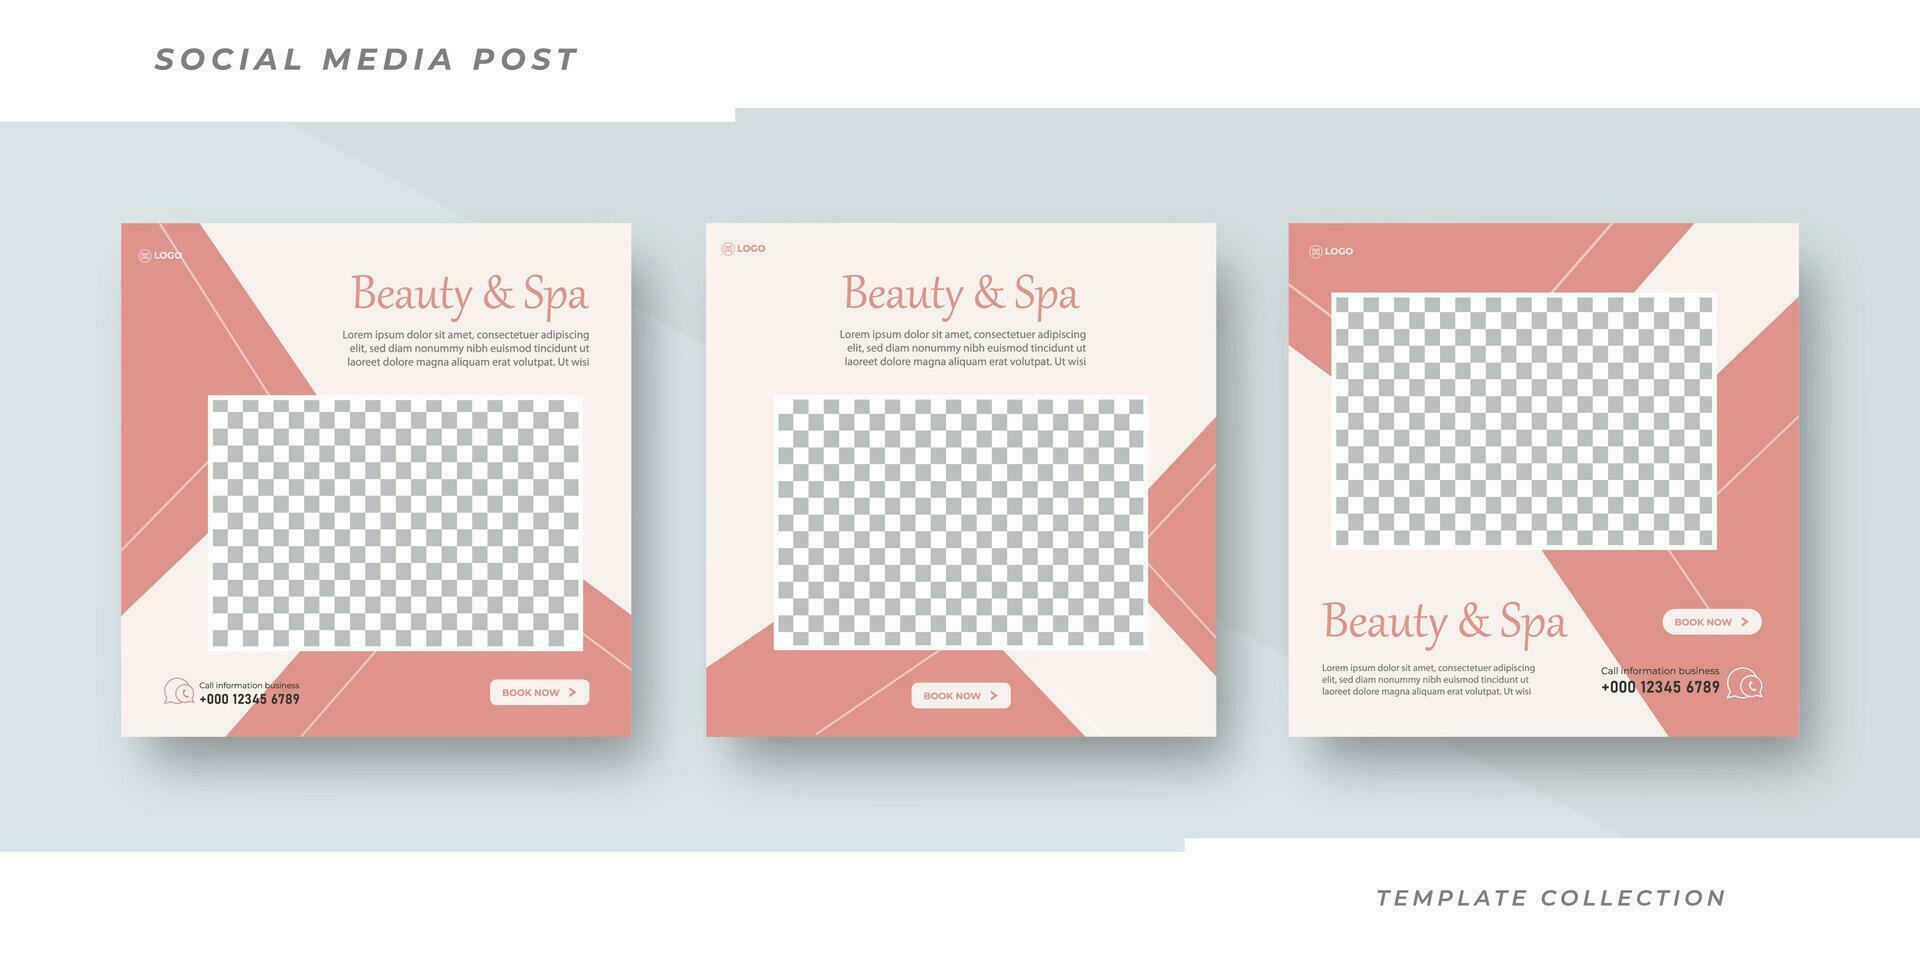 Beauty and spa skincare Makeup Social media post Banner Square Flyer Template Design Pro vector